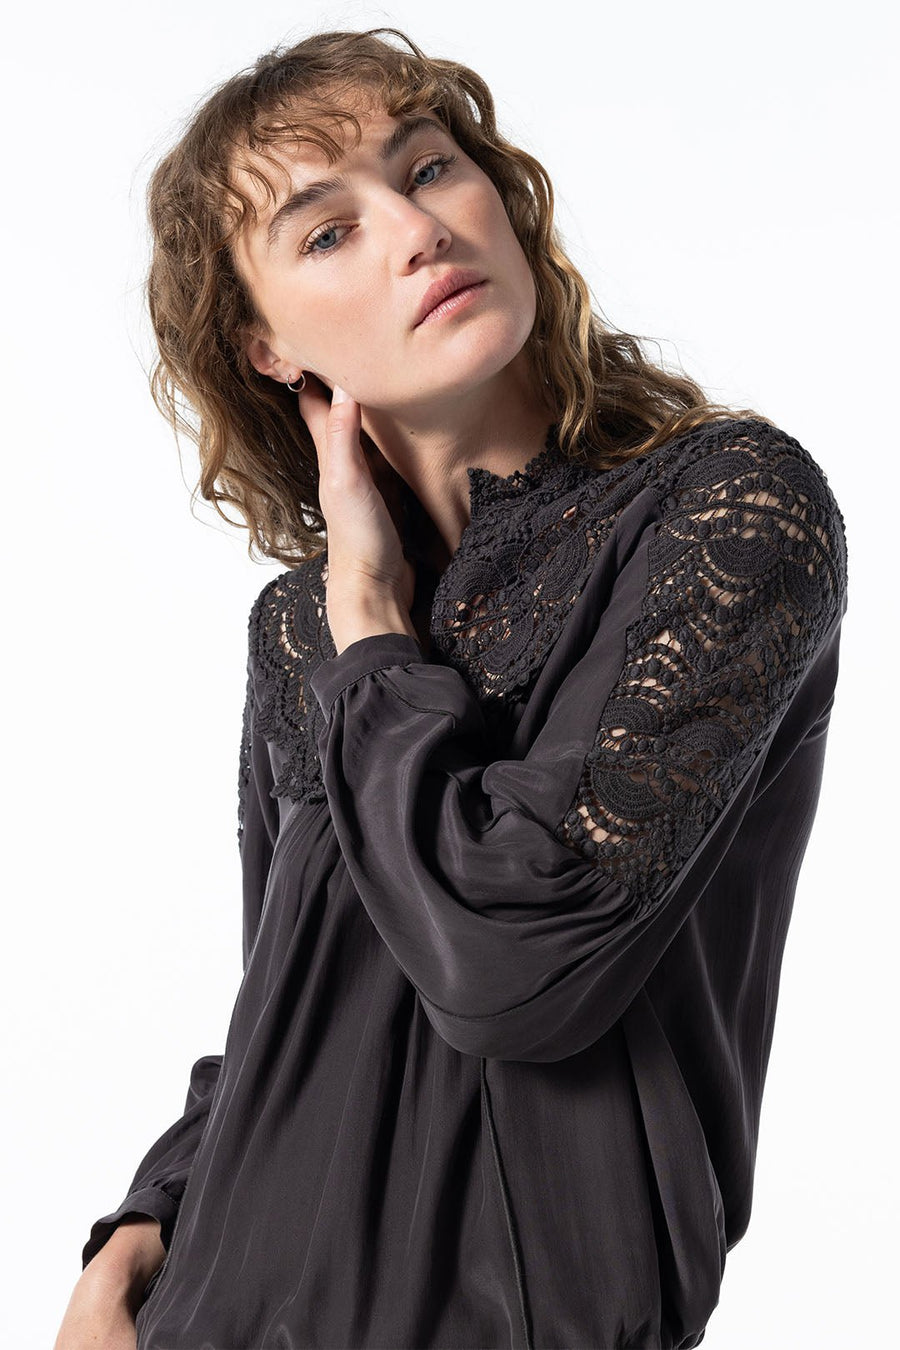 THE EMPRESS LONG SLEEVE BLOUSE, LICORICE - Burning Torch Online Boutique